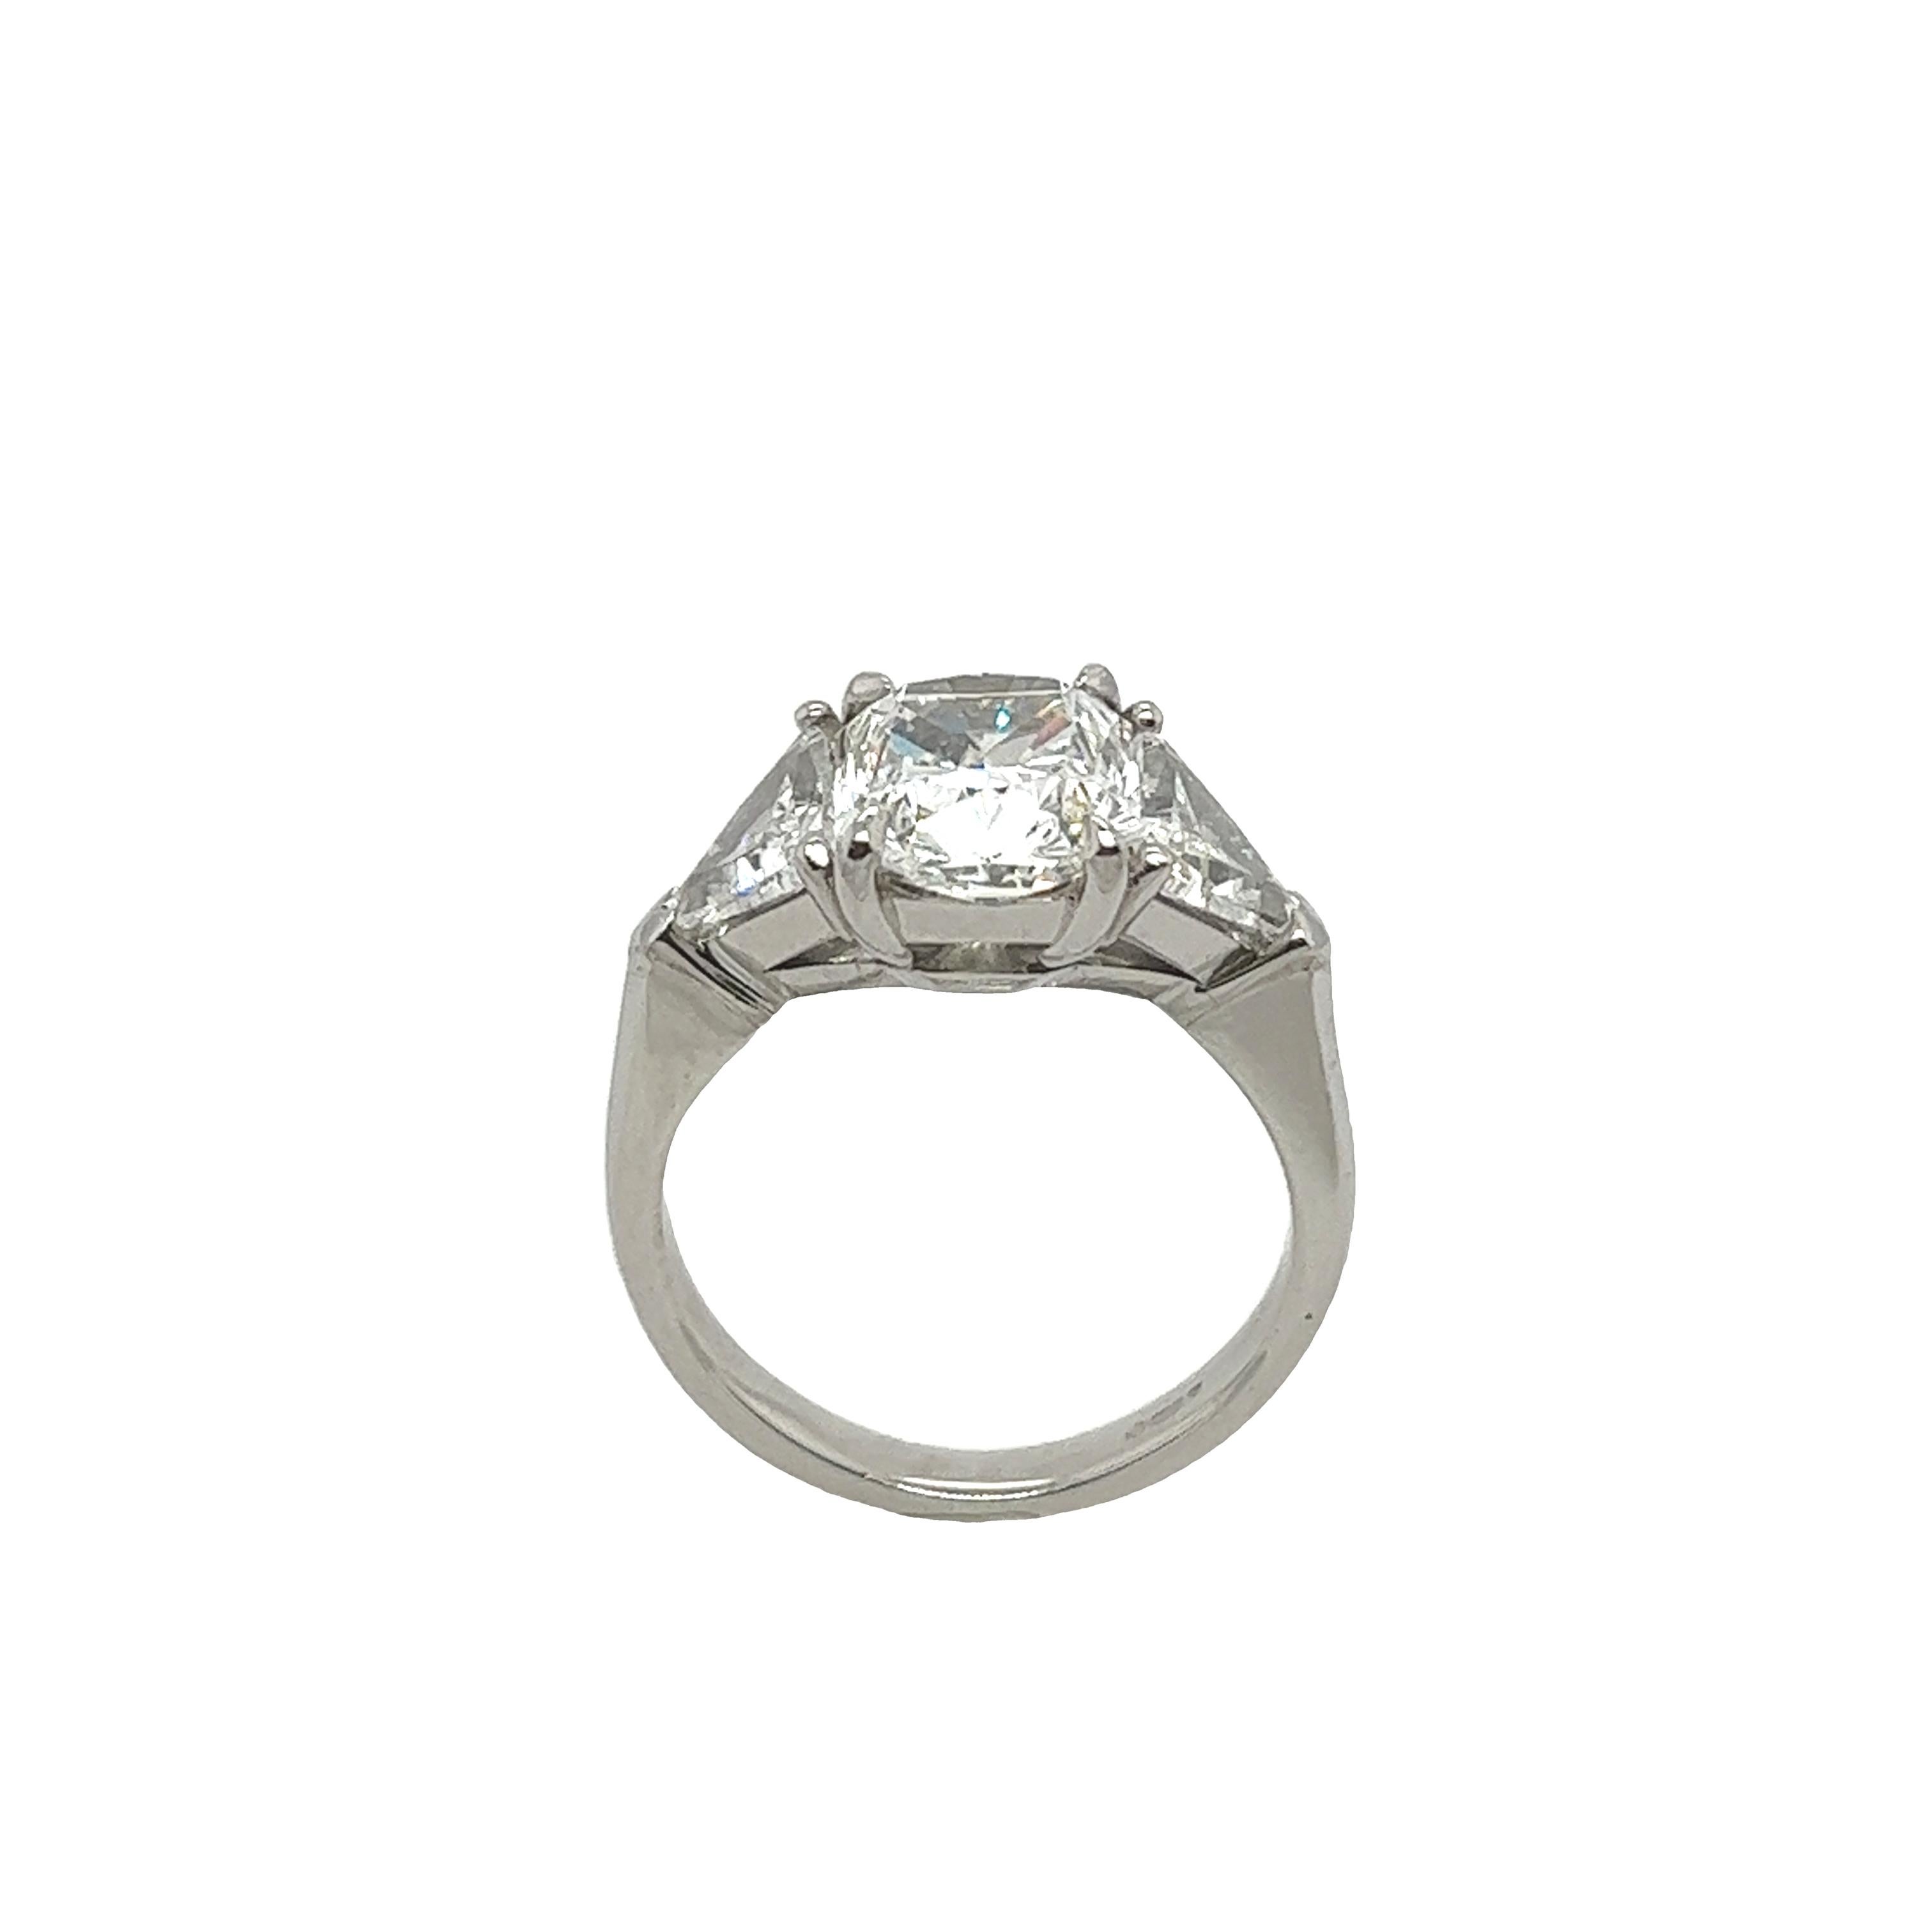 Platinum 2.03ct E colour VVS2 clarity square modified GIA 
natural diamond 3-stone ring set with 2 matching triangle diamonds 1.60ct.
This ring is elegant and beautiful for an engagement ring and will last as long as your love does.
·         Total